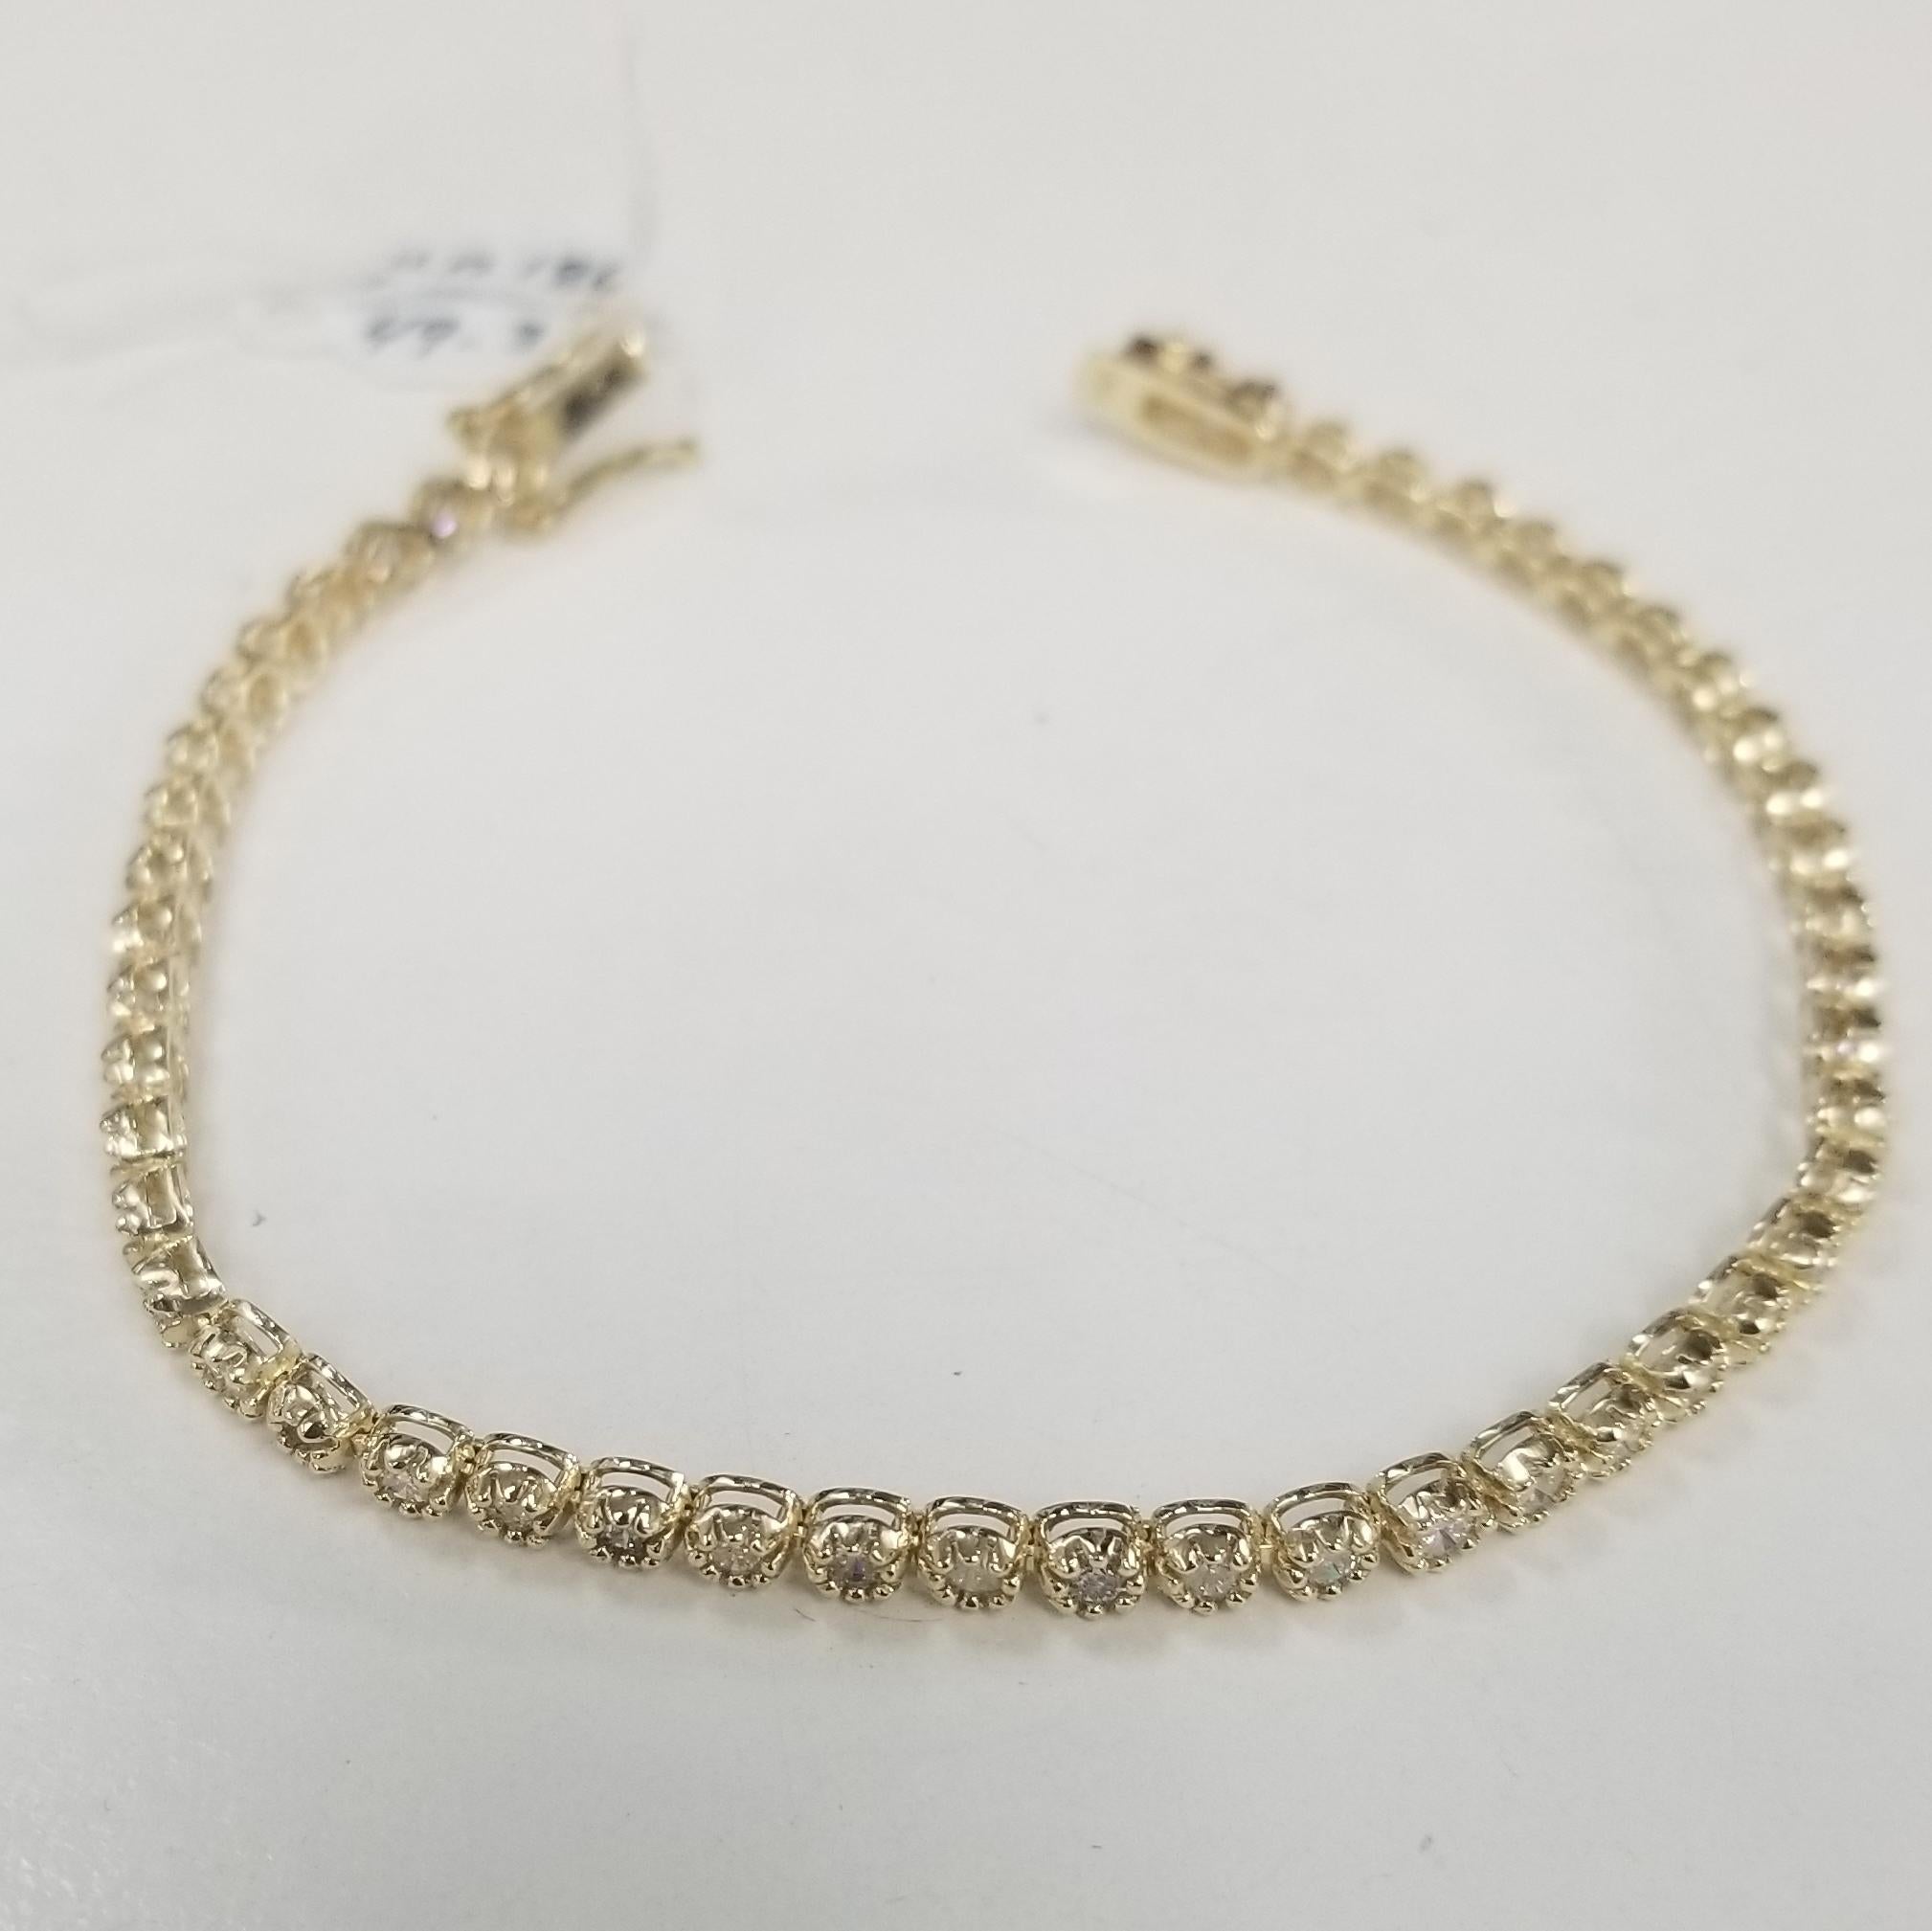 Specifications:
    main stone:ROUND DIAMONDS
    diamonds: 49 PCS
    carat total weight:approximately 3.02 CTW
    color: H-I
    clarity: SI1-SI3
    brand:CUSTOM MADE
    metal:14K yellow gold
    type:BRACELET
    weight:7.5 gr
    length:7.25